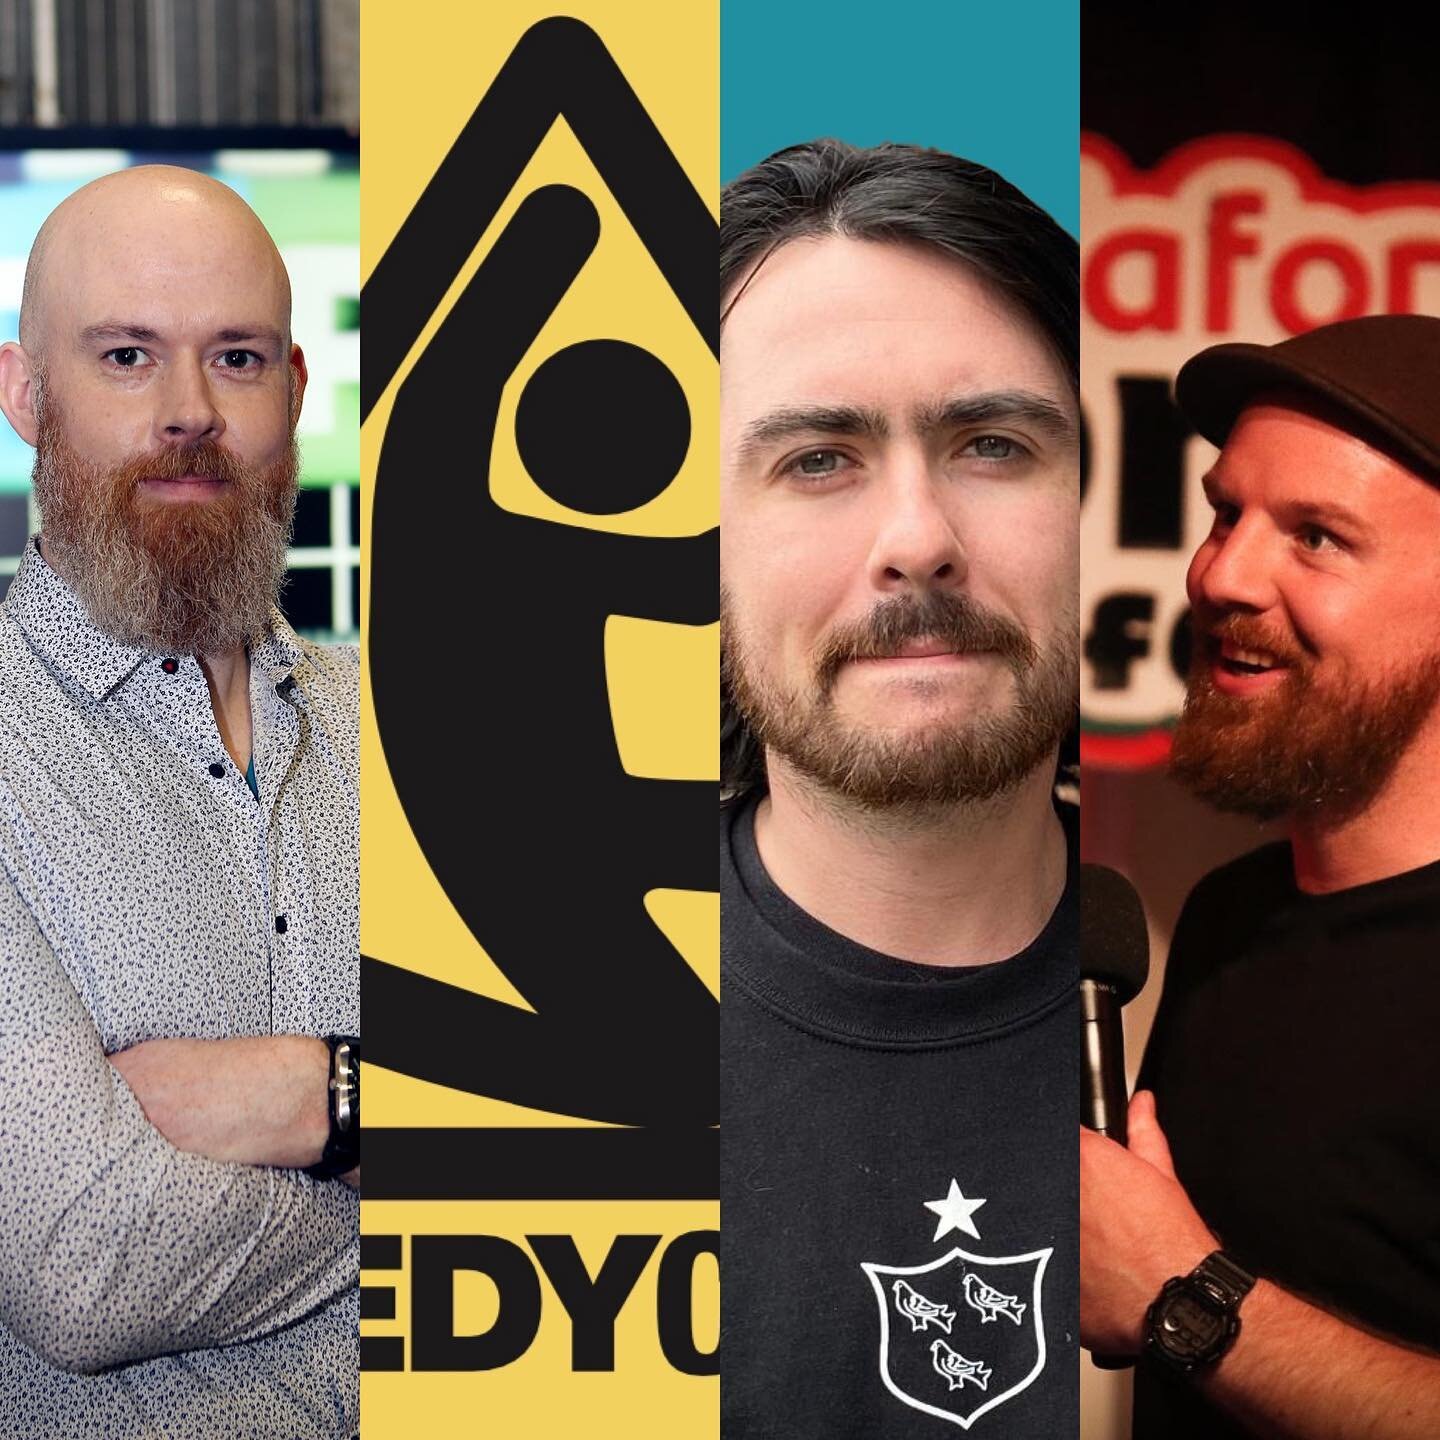 A great night of comedy this Sunday at The Crunch #Dublin with EDWIN SAMMON (RTE&rsquo;s &lsquo;Bridget &amp; Eamon&rsquo;) headlining 🙌 With Richie Bree &amp; Kevin Larney 🥳

Doors 8:15pm downstairs at The Stag&rsquo;s Head &amp; free entry 👍